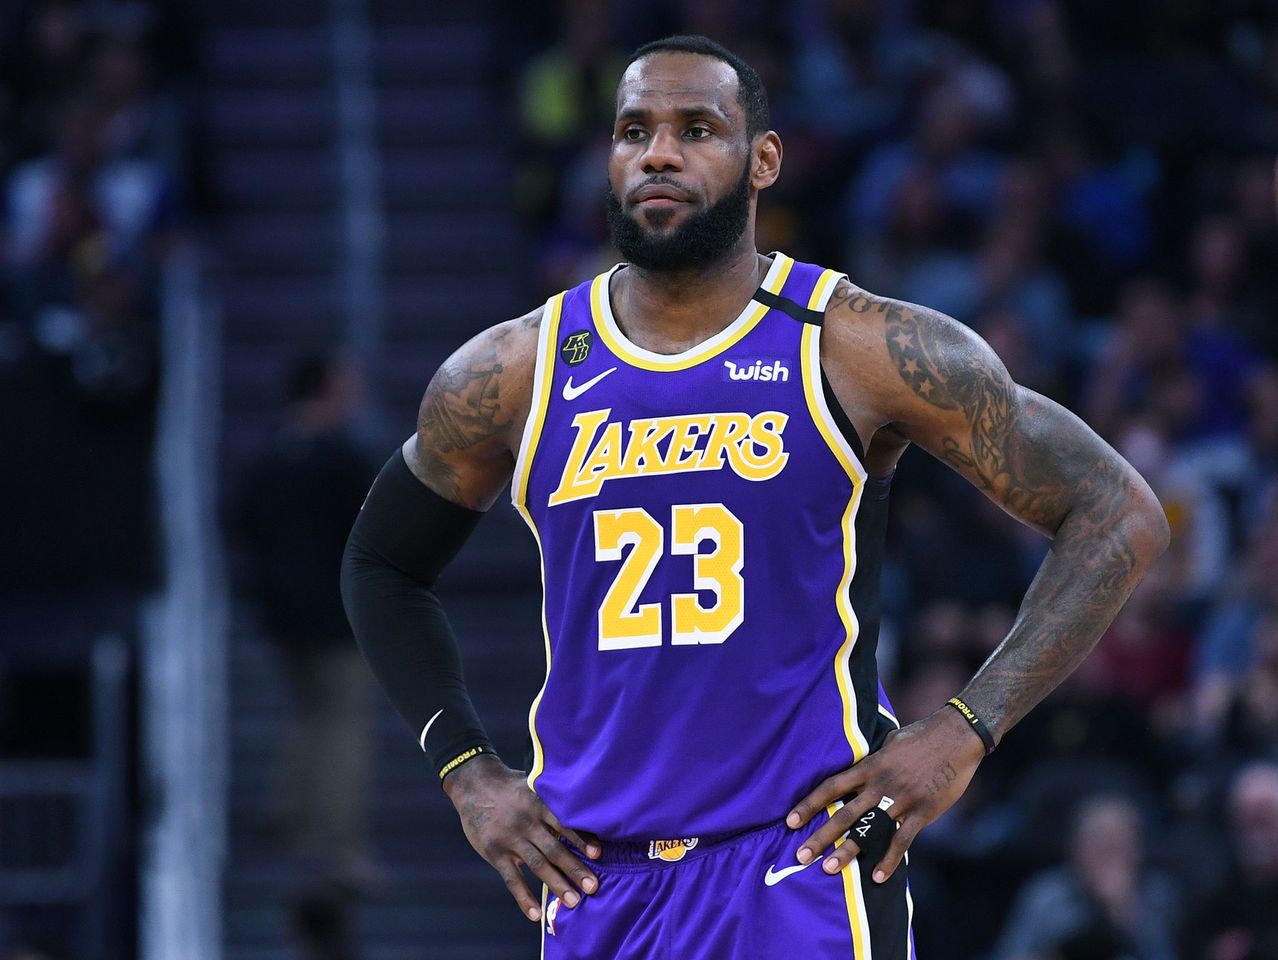 LeBron James #23 of the Los Angeles Lakers looks on against the Golden State Warriors during an NBA basketball game at Chase Center on February 08, 2020 in San Francisco, California. | Source: Getty Images